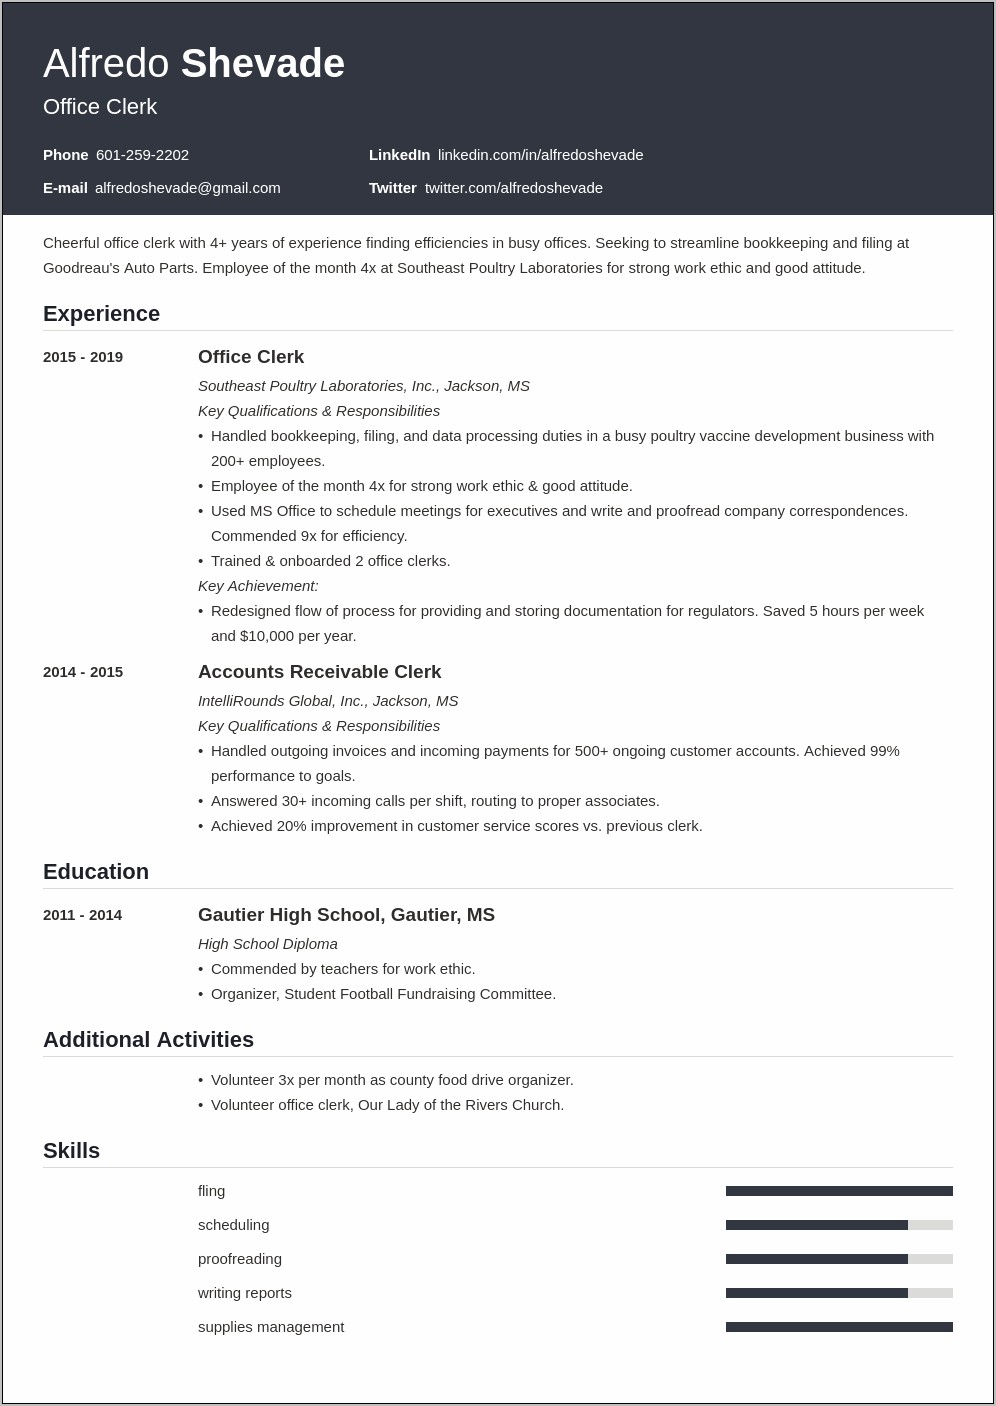 Resume For Clerical With No Experience